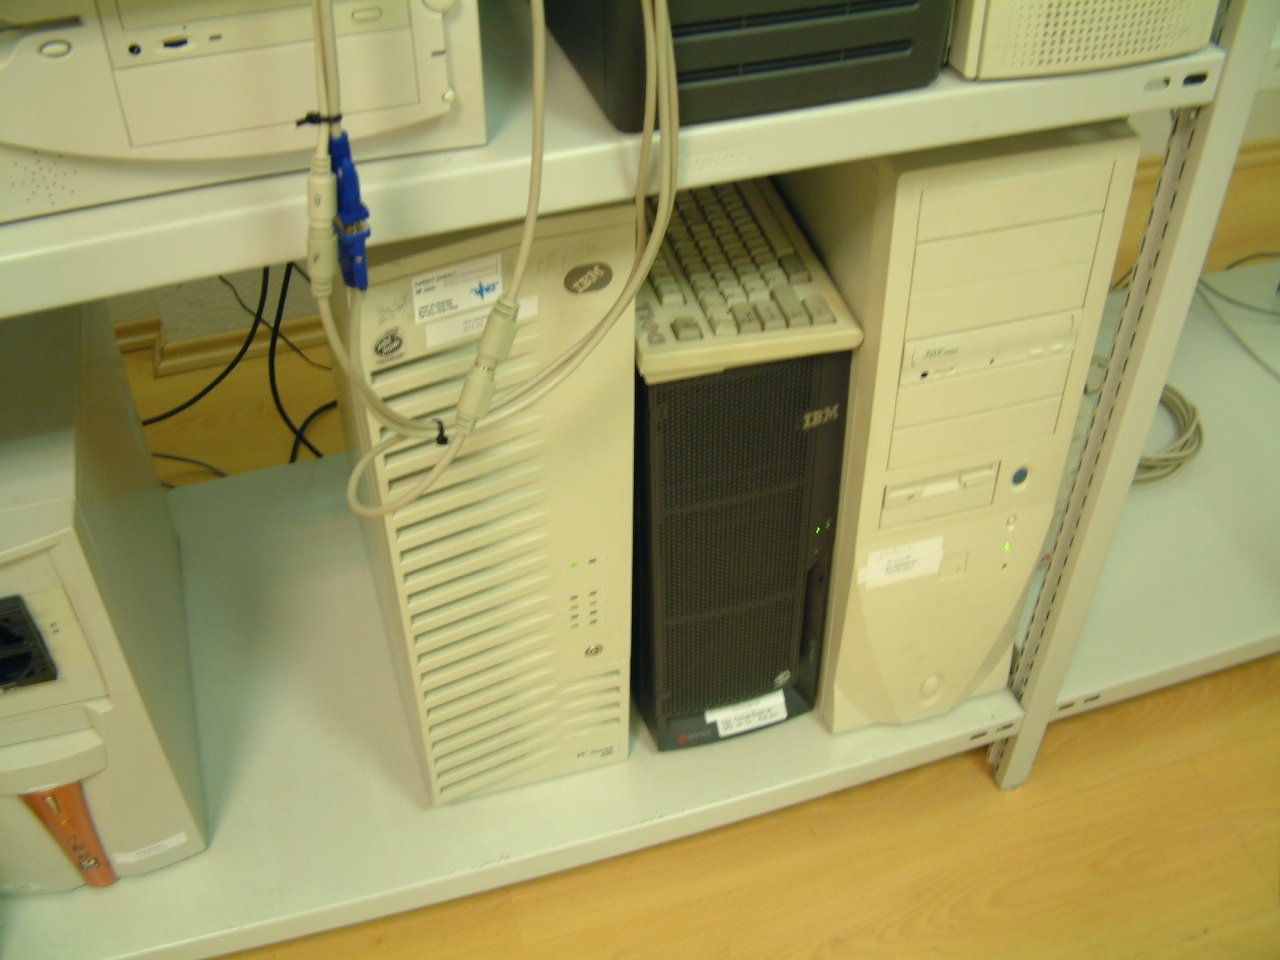 a row of servers with cables and plugins attached